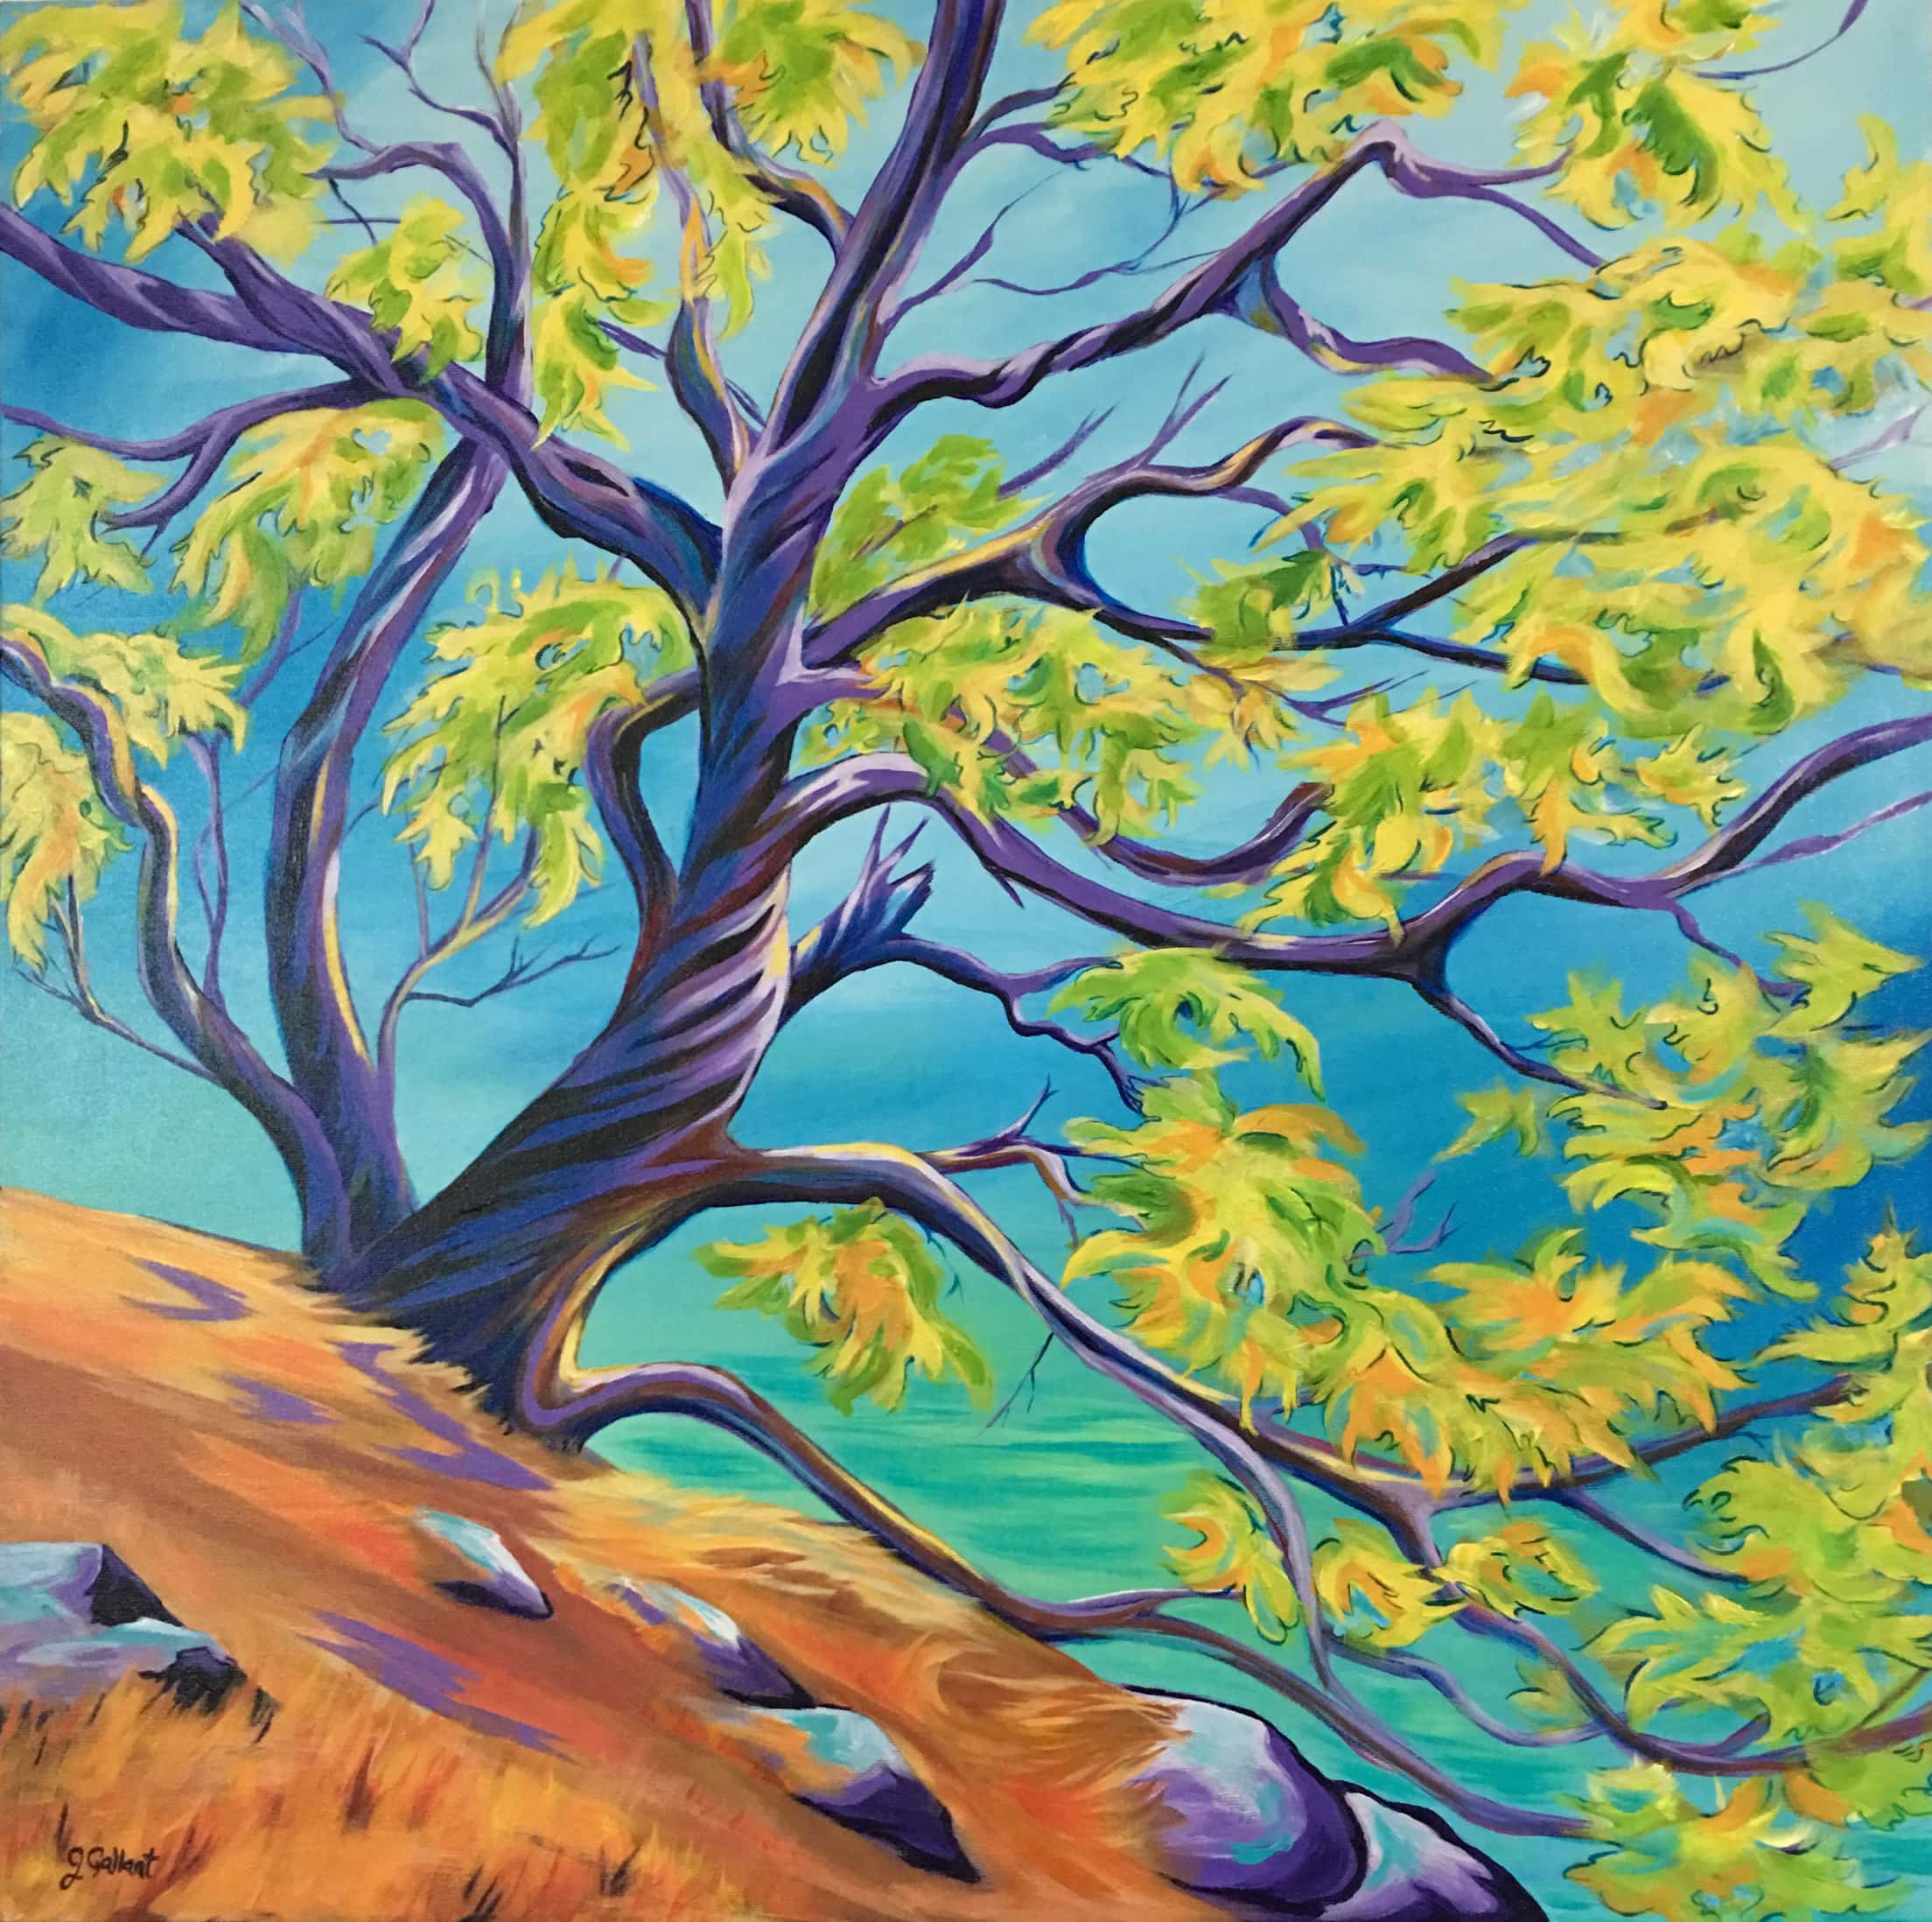 Dancing Tree Acrylic Painting by Janice Gallant https://janicegallant.com/